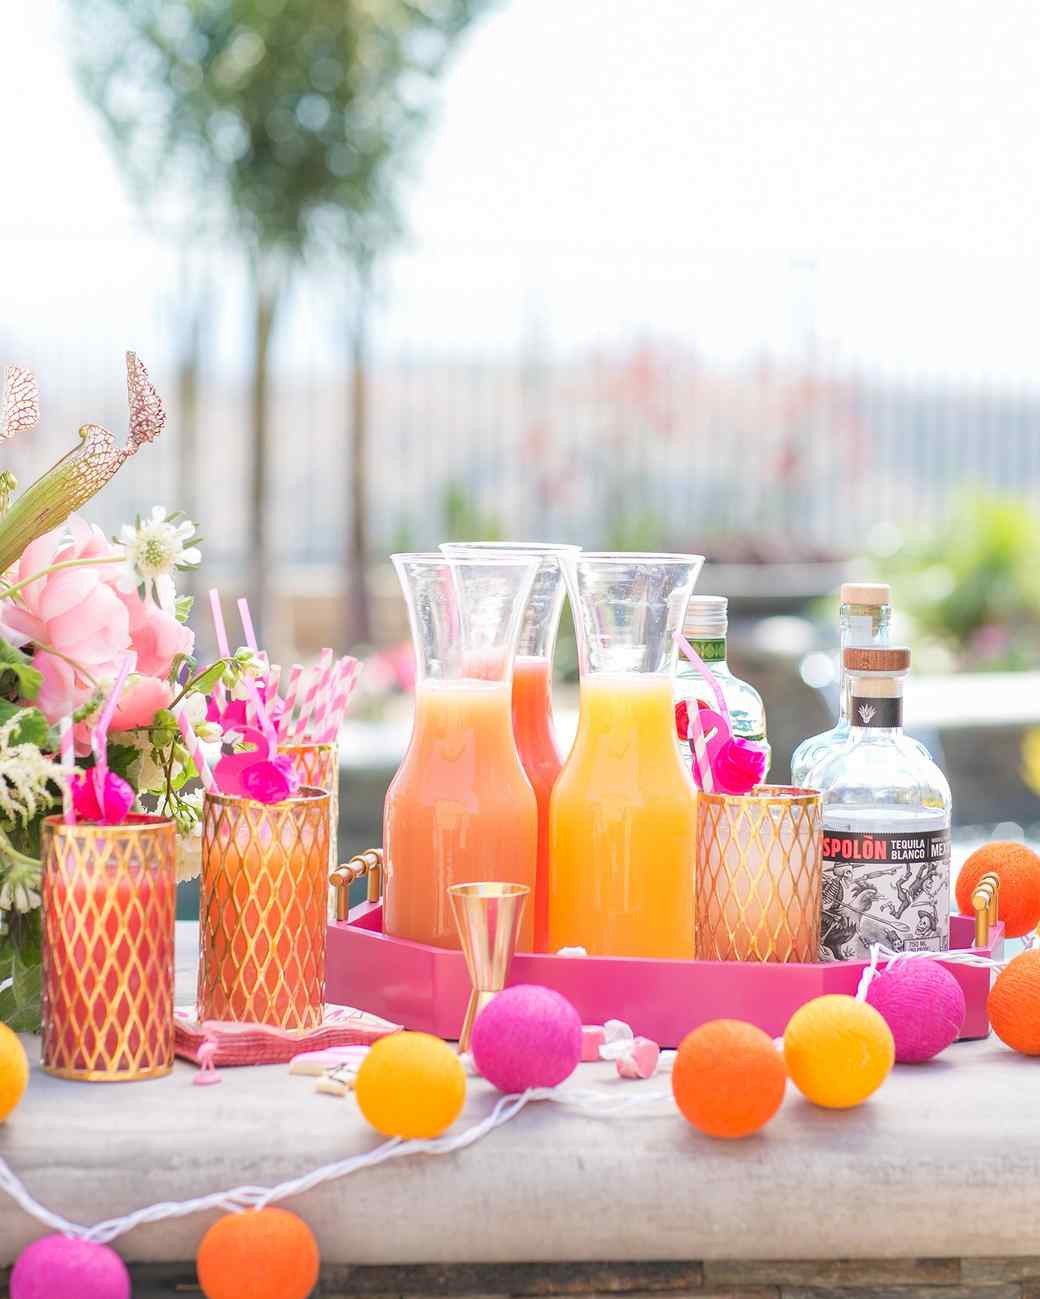 Summer Party Decorating Ideas
 Summer Party Ideas and Decorations